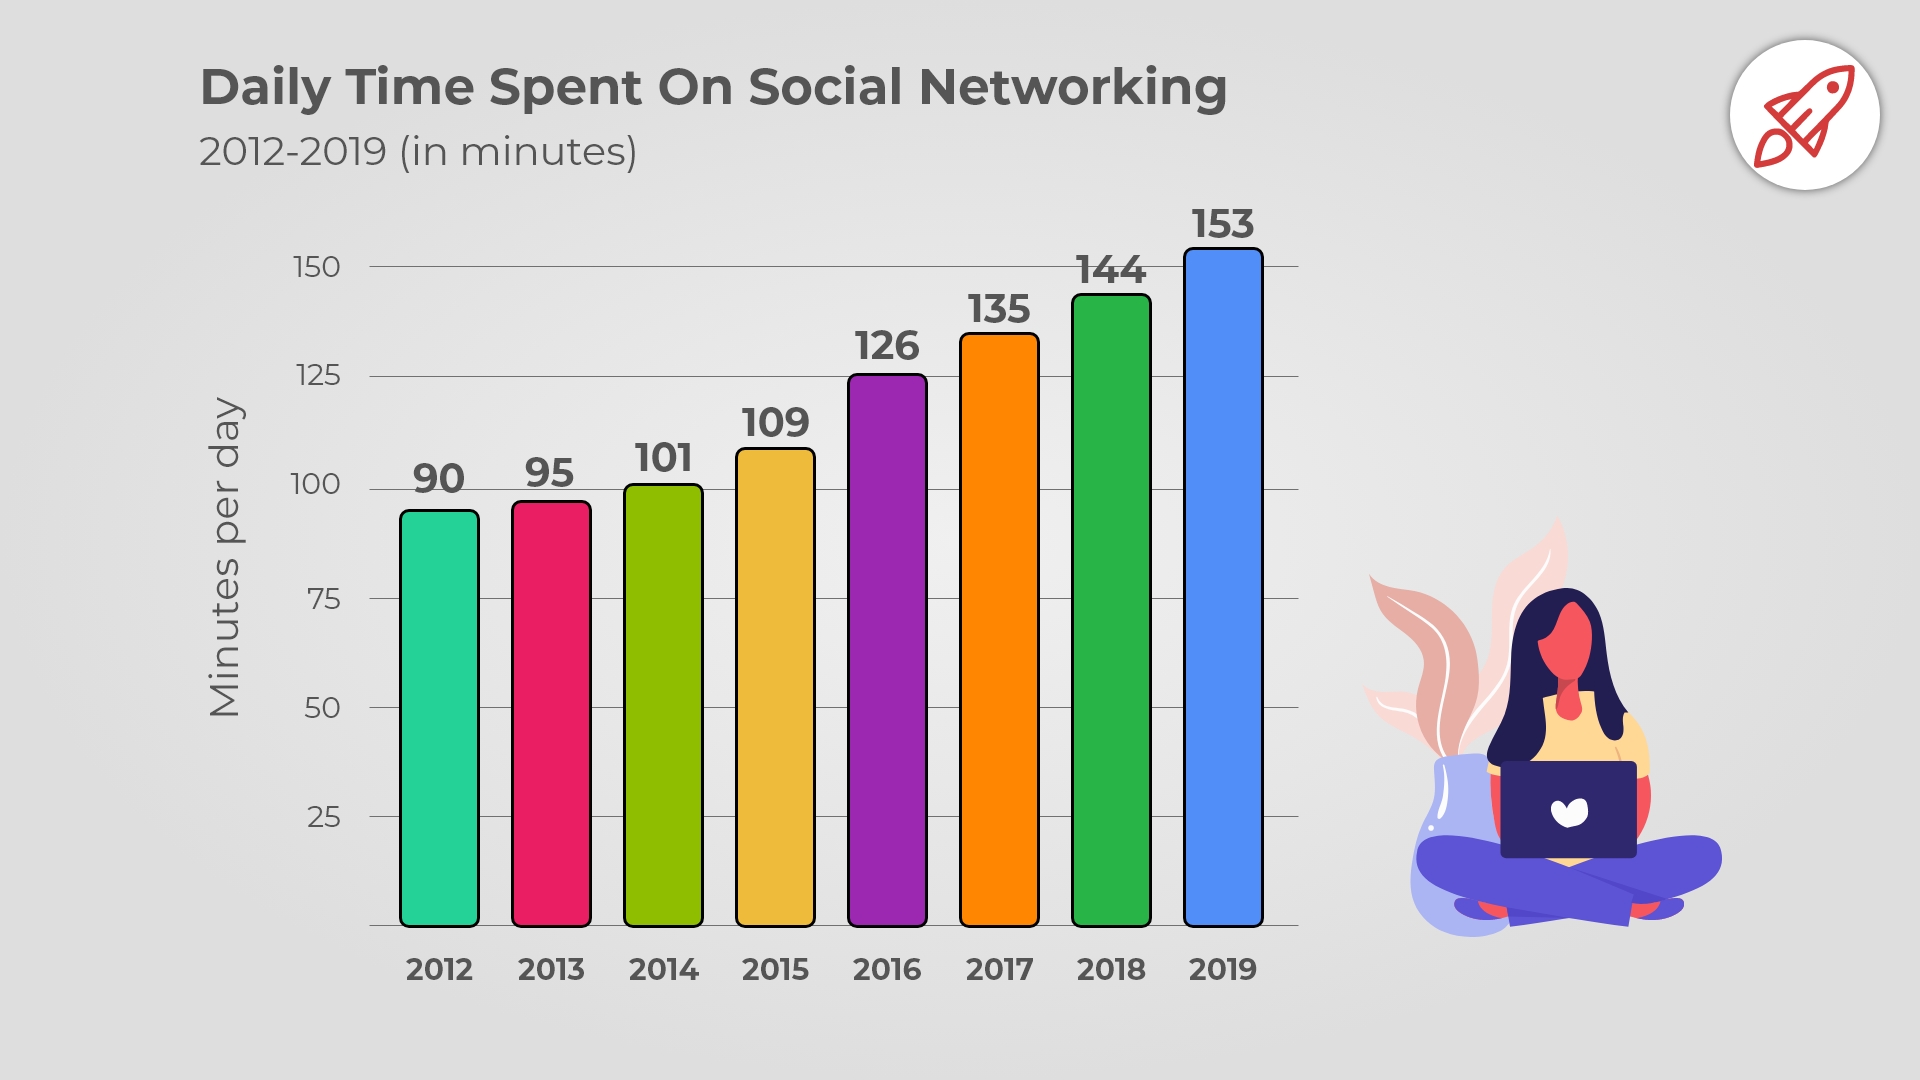 Daily time spent on social networking